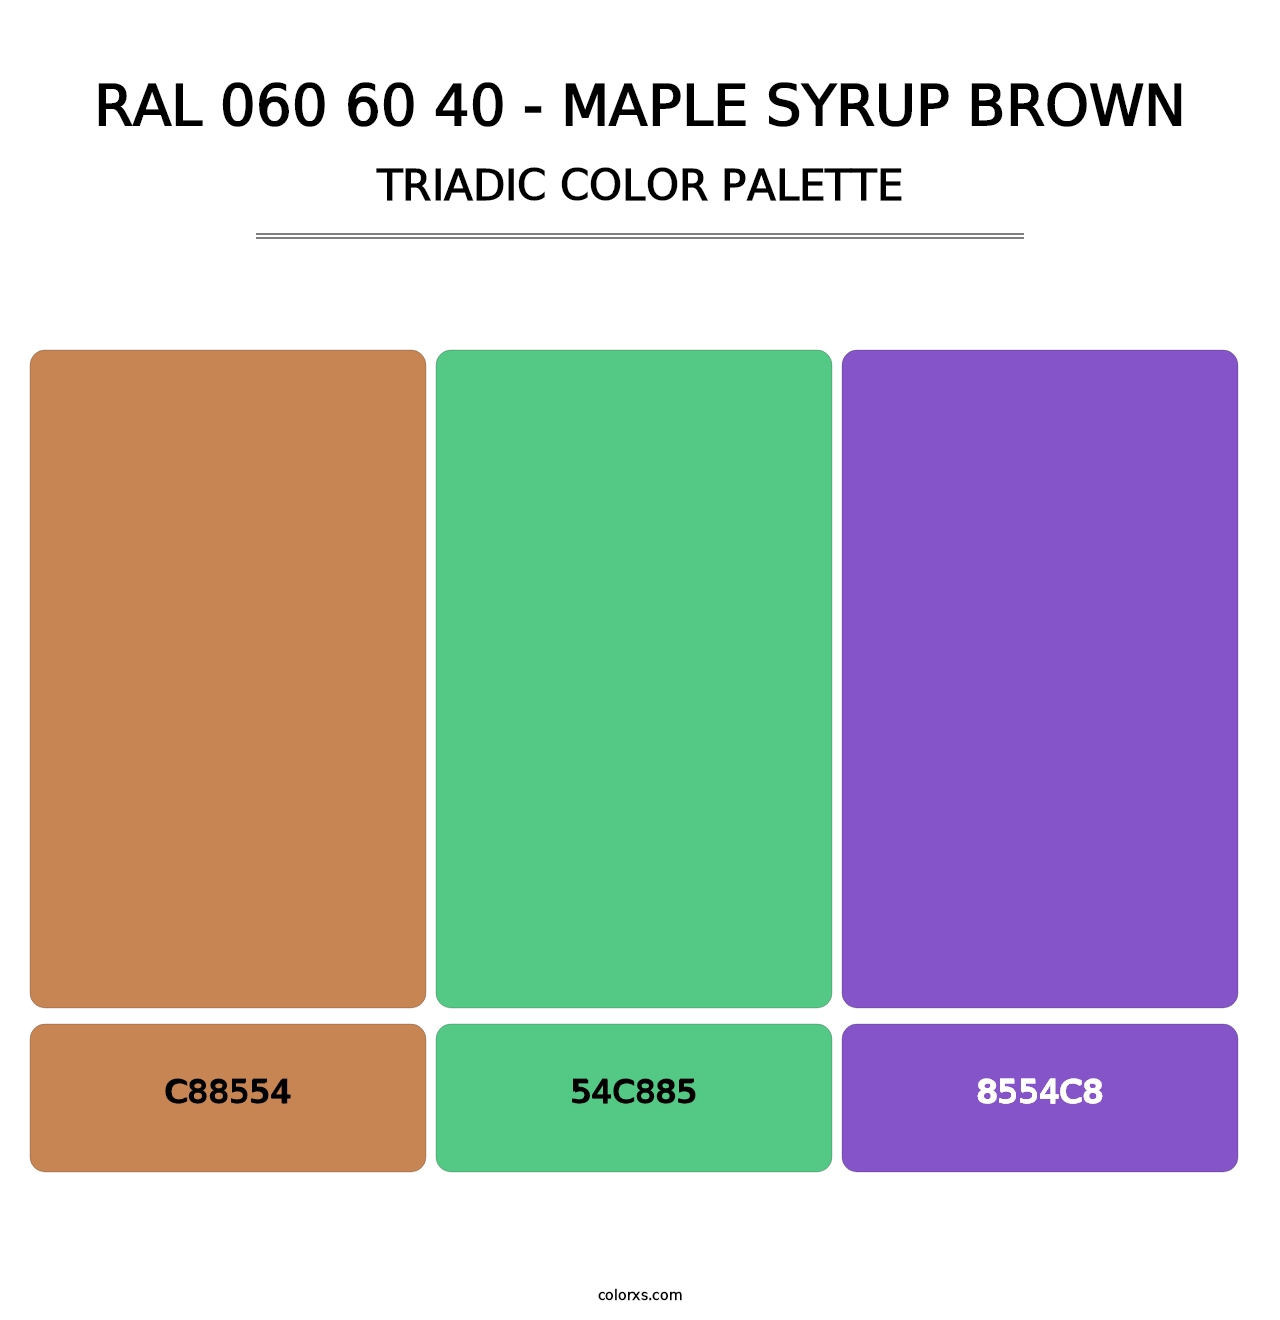 RAL 060 60 40 - Maple Syrup Brown - Triadic Color Palette